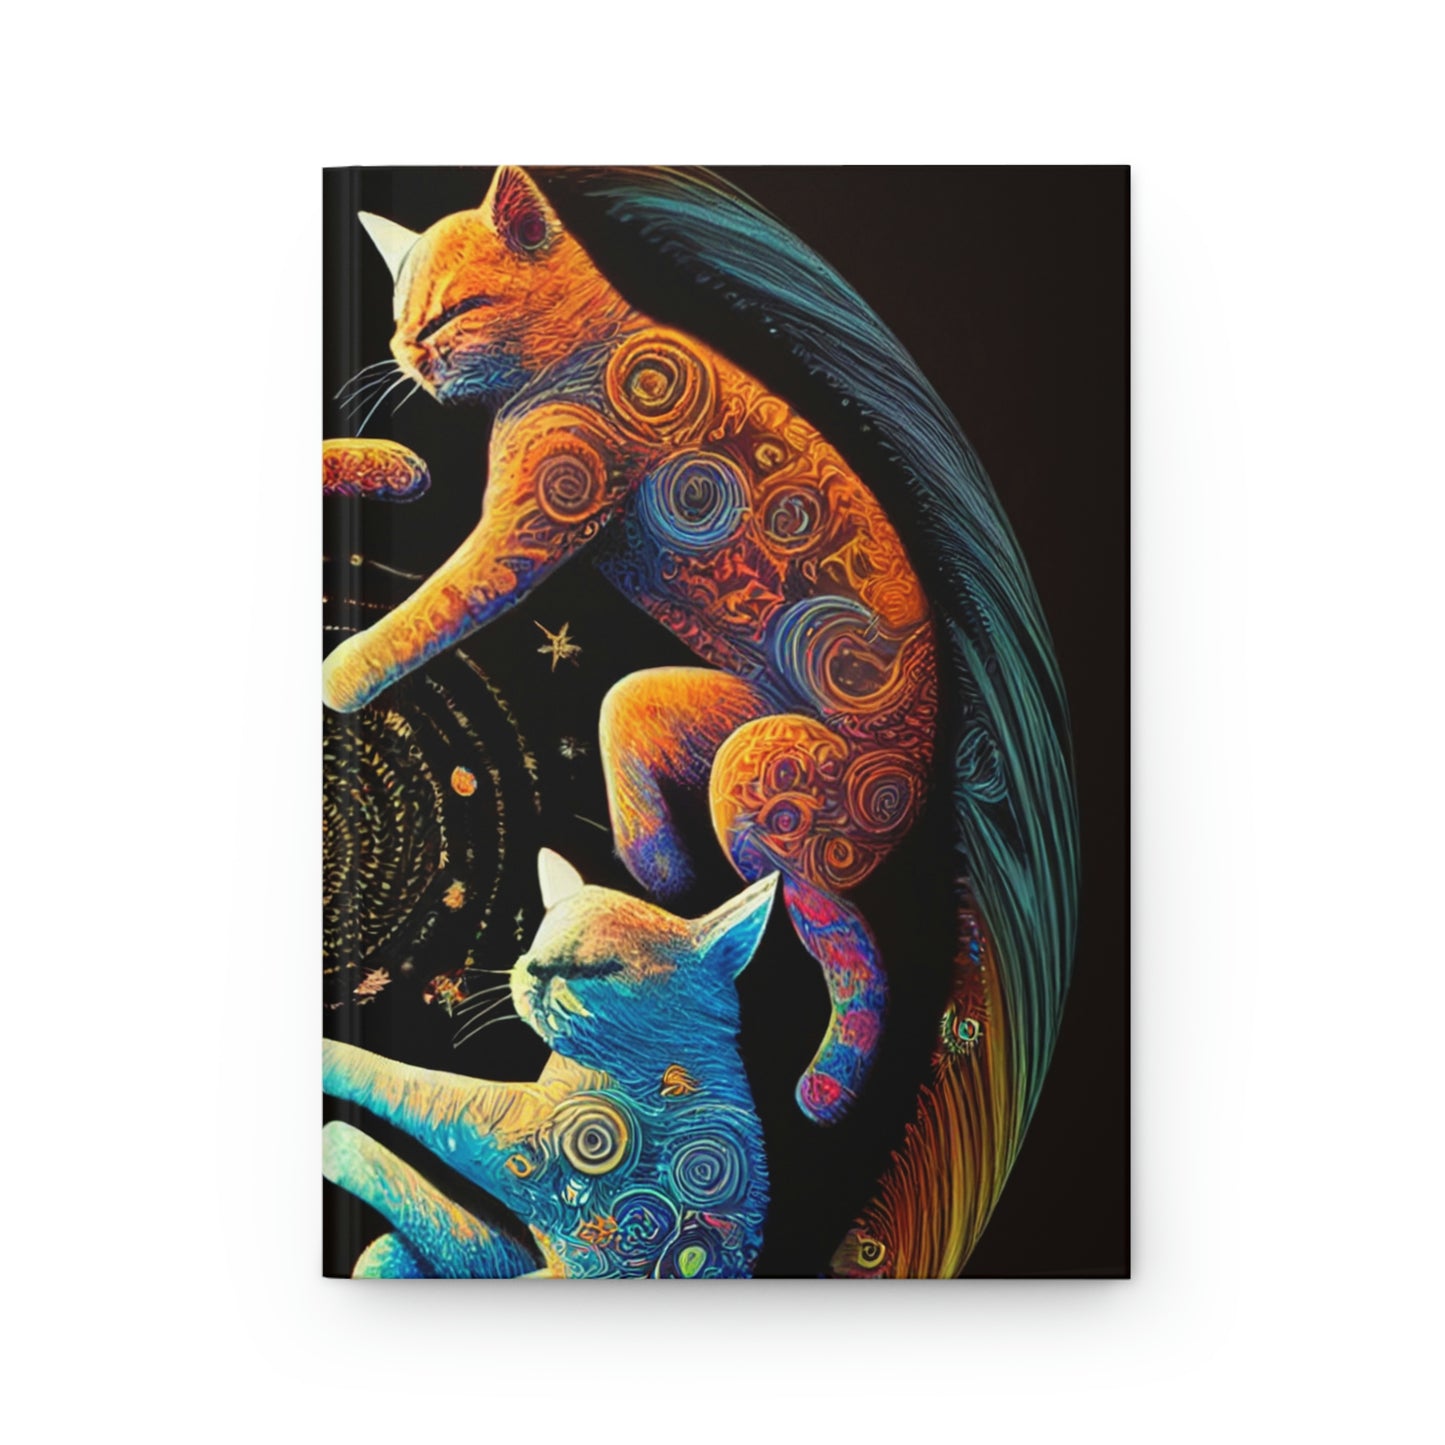 Trippy Cats Hardcover Journal